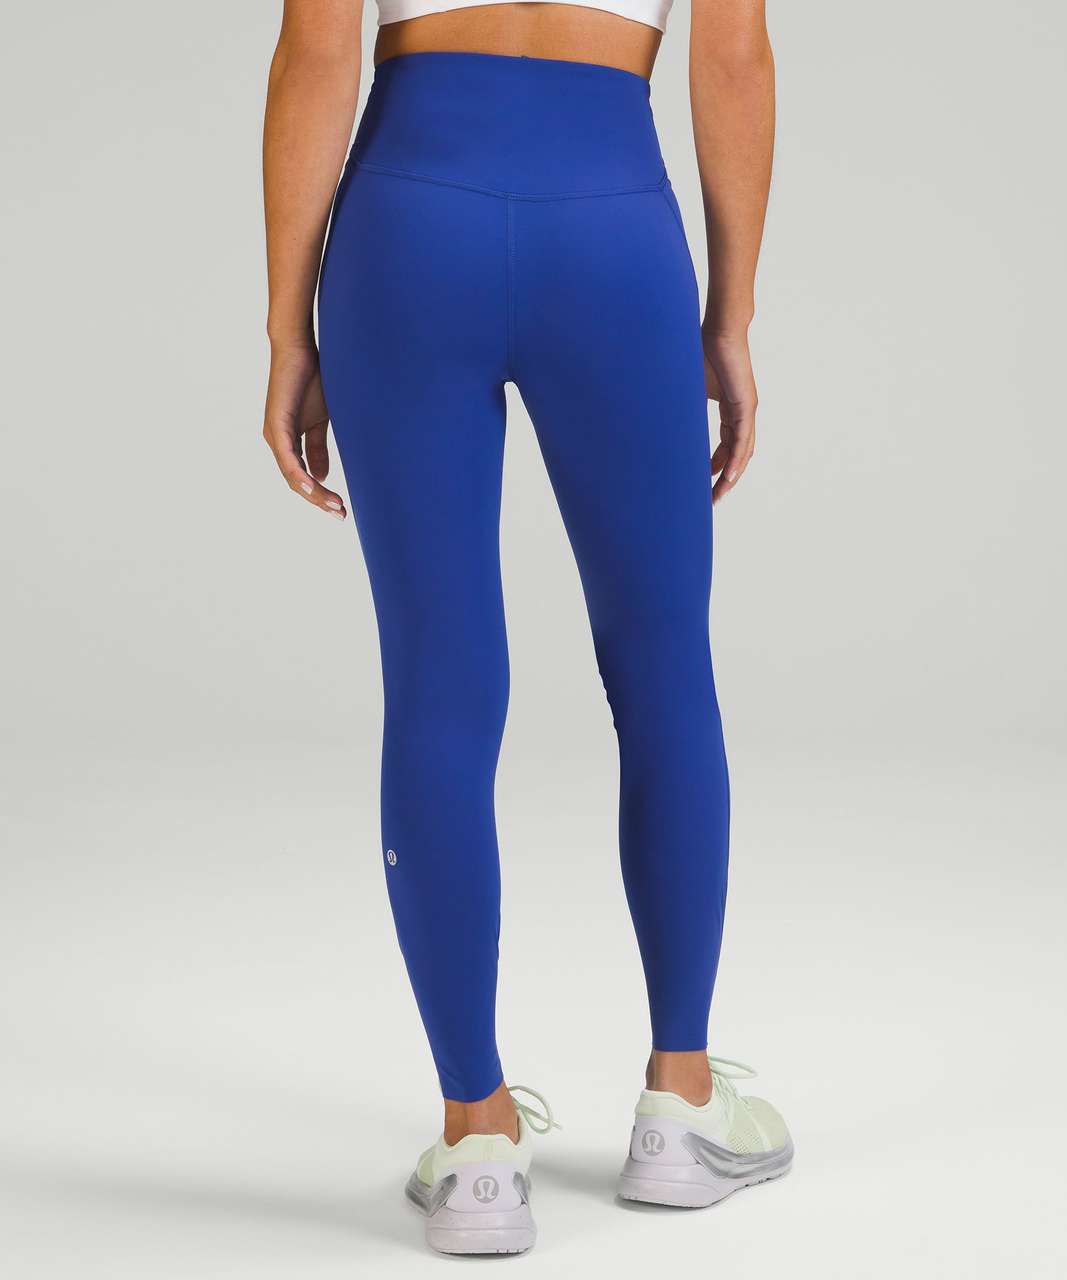 Lululemon Base Pace High-Rise Running Tight 25 *Brushed Nulux